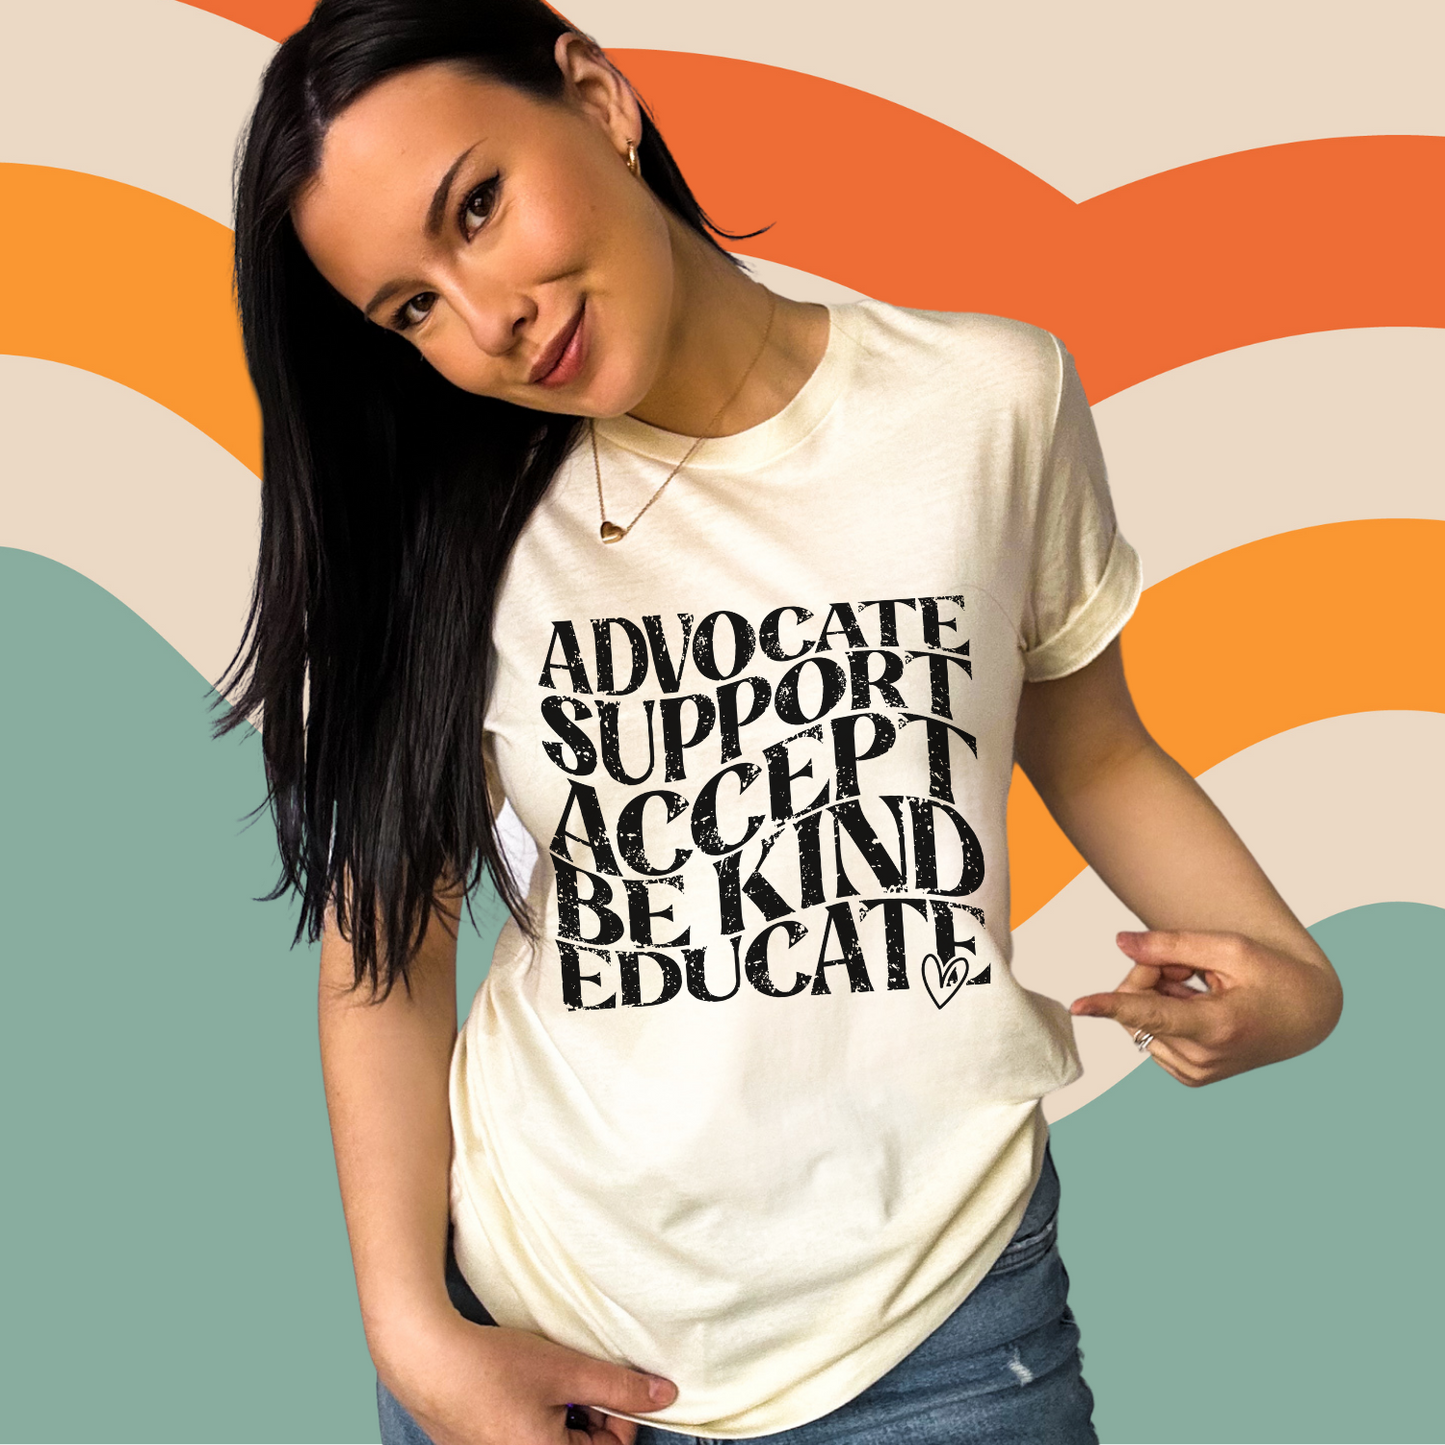 Advocate, support, accept, be kind, educate tee